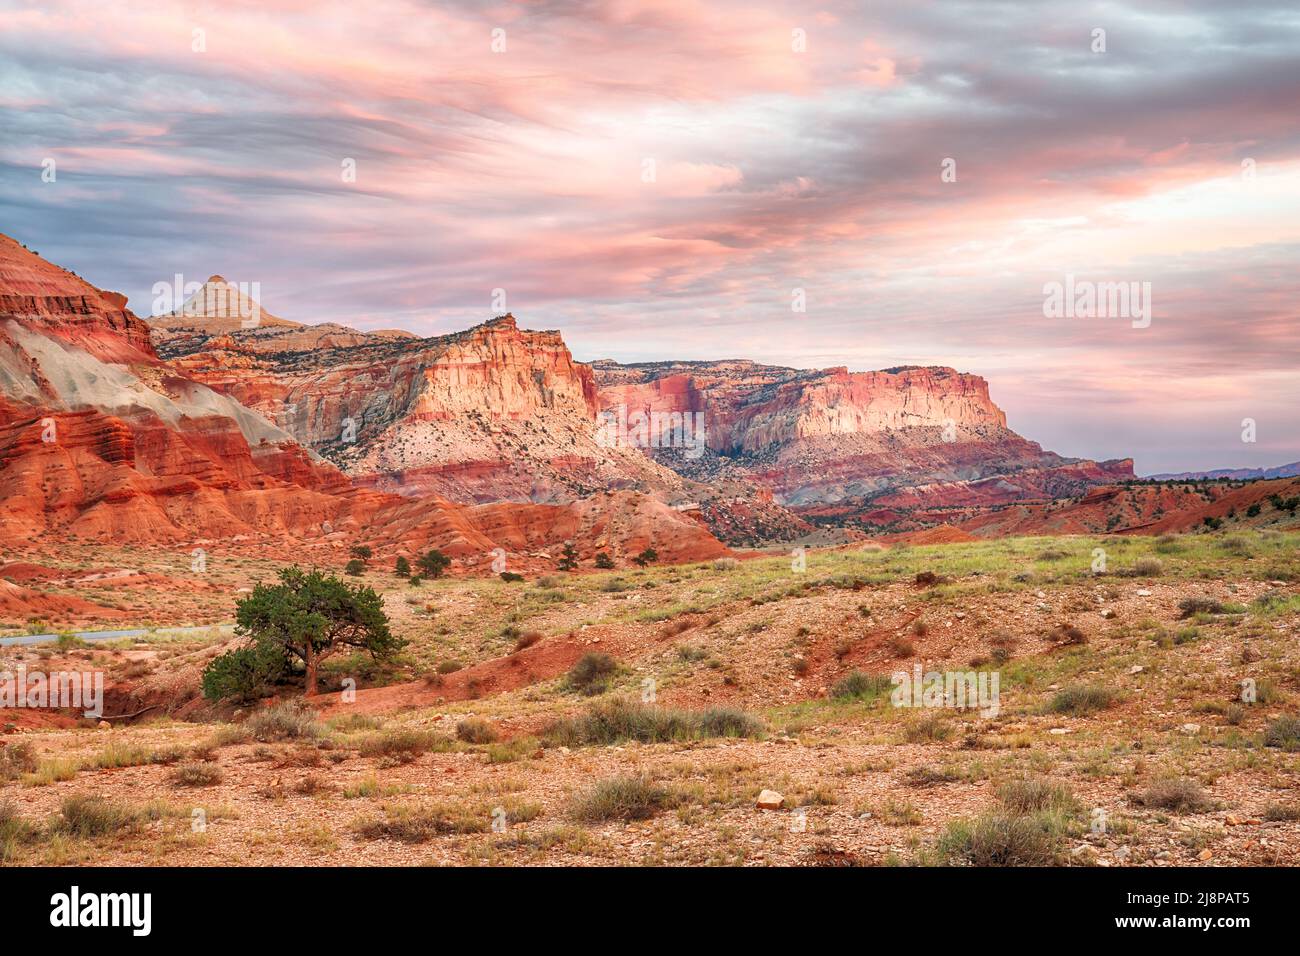 Sunset along the cliffs in Capitol Reef National Park, Utah Stock Photo